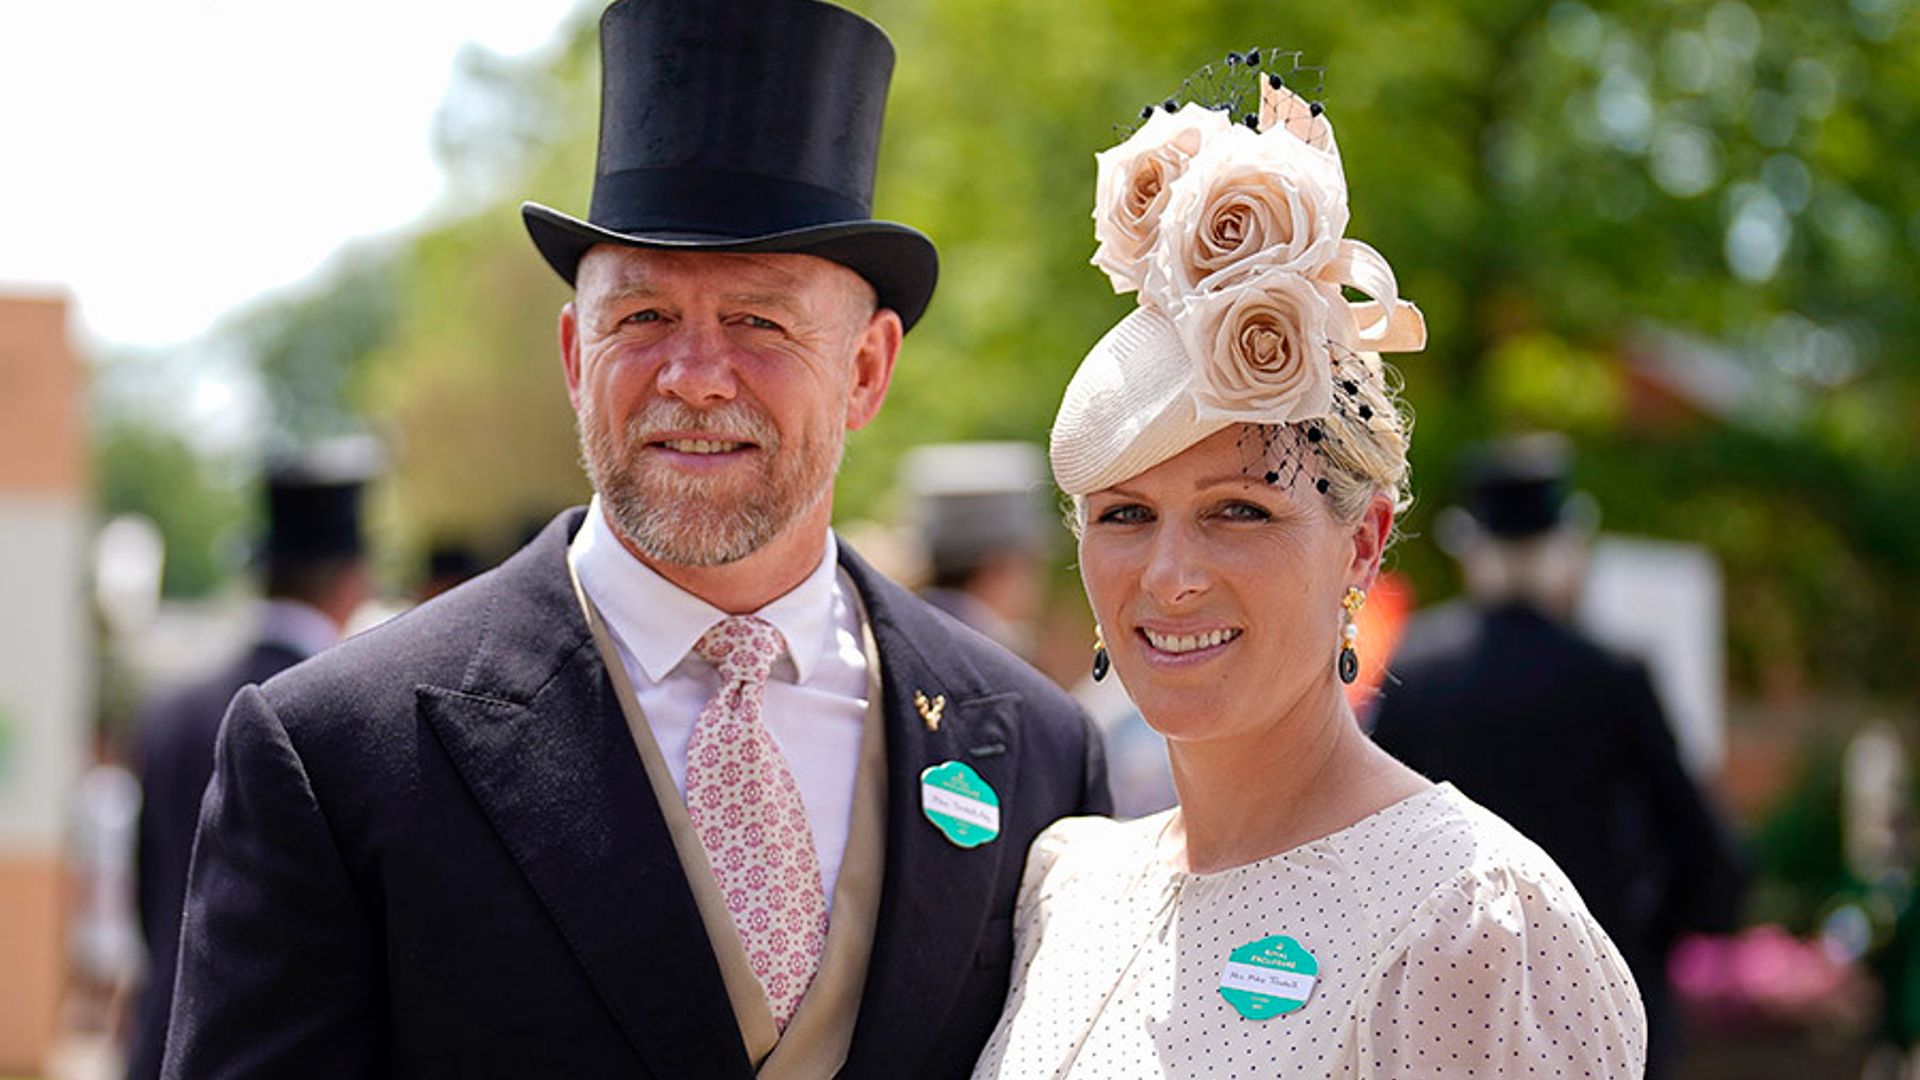 Zara Tindall looks gorgeous at 2021 Royal Ascot in one of first appearances after birth of son Lucas